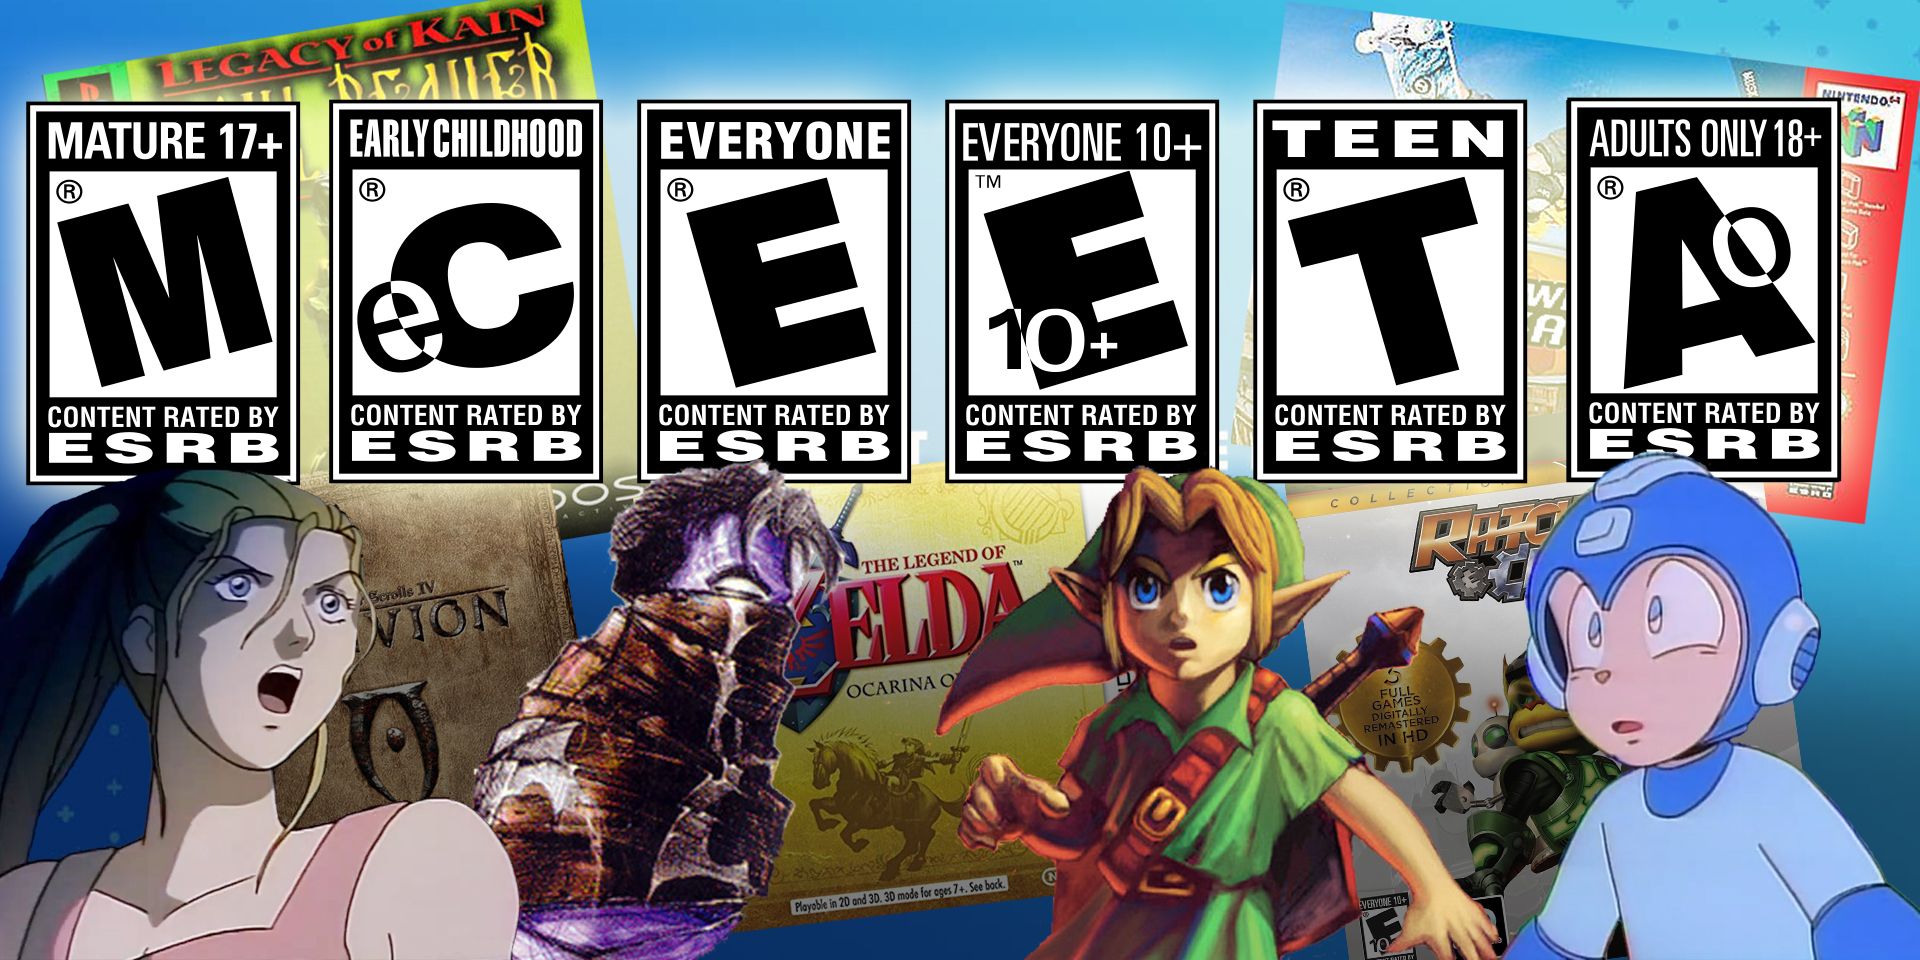 Half of All ESRB Ratings Assigned in 2022 Were E for Everyone